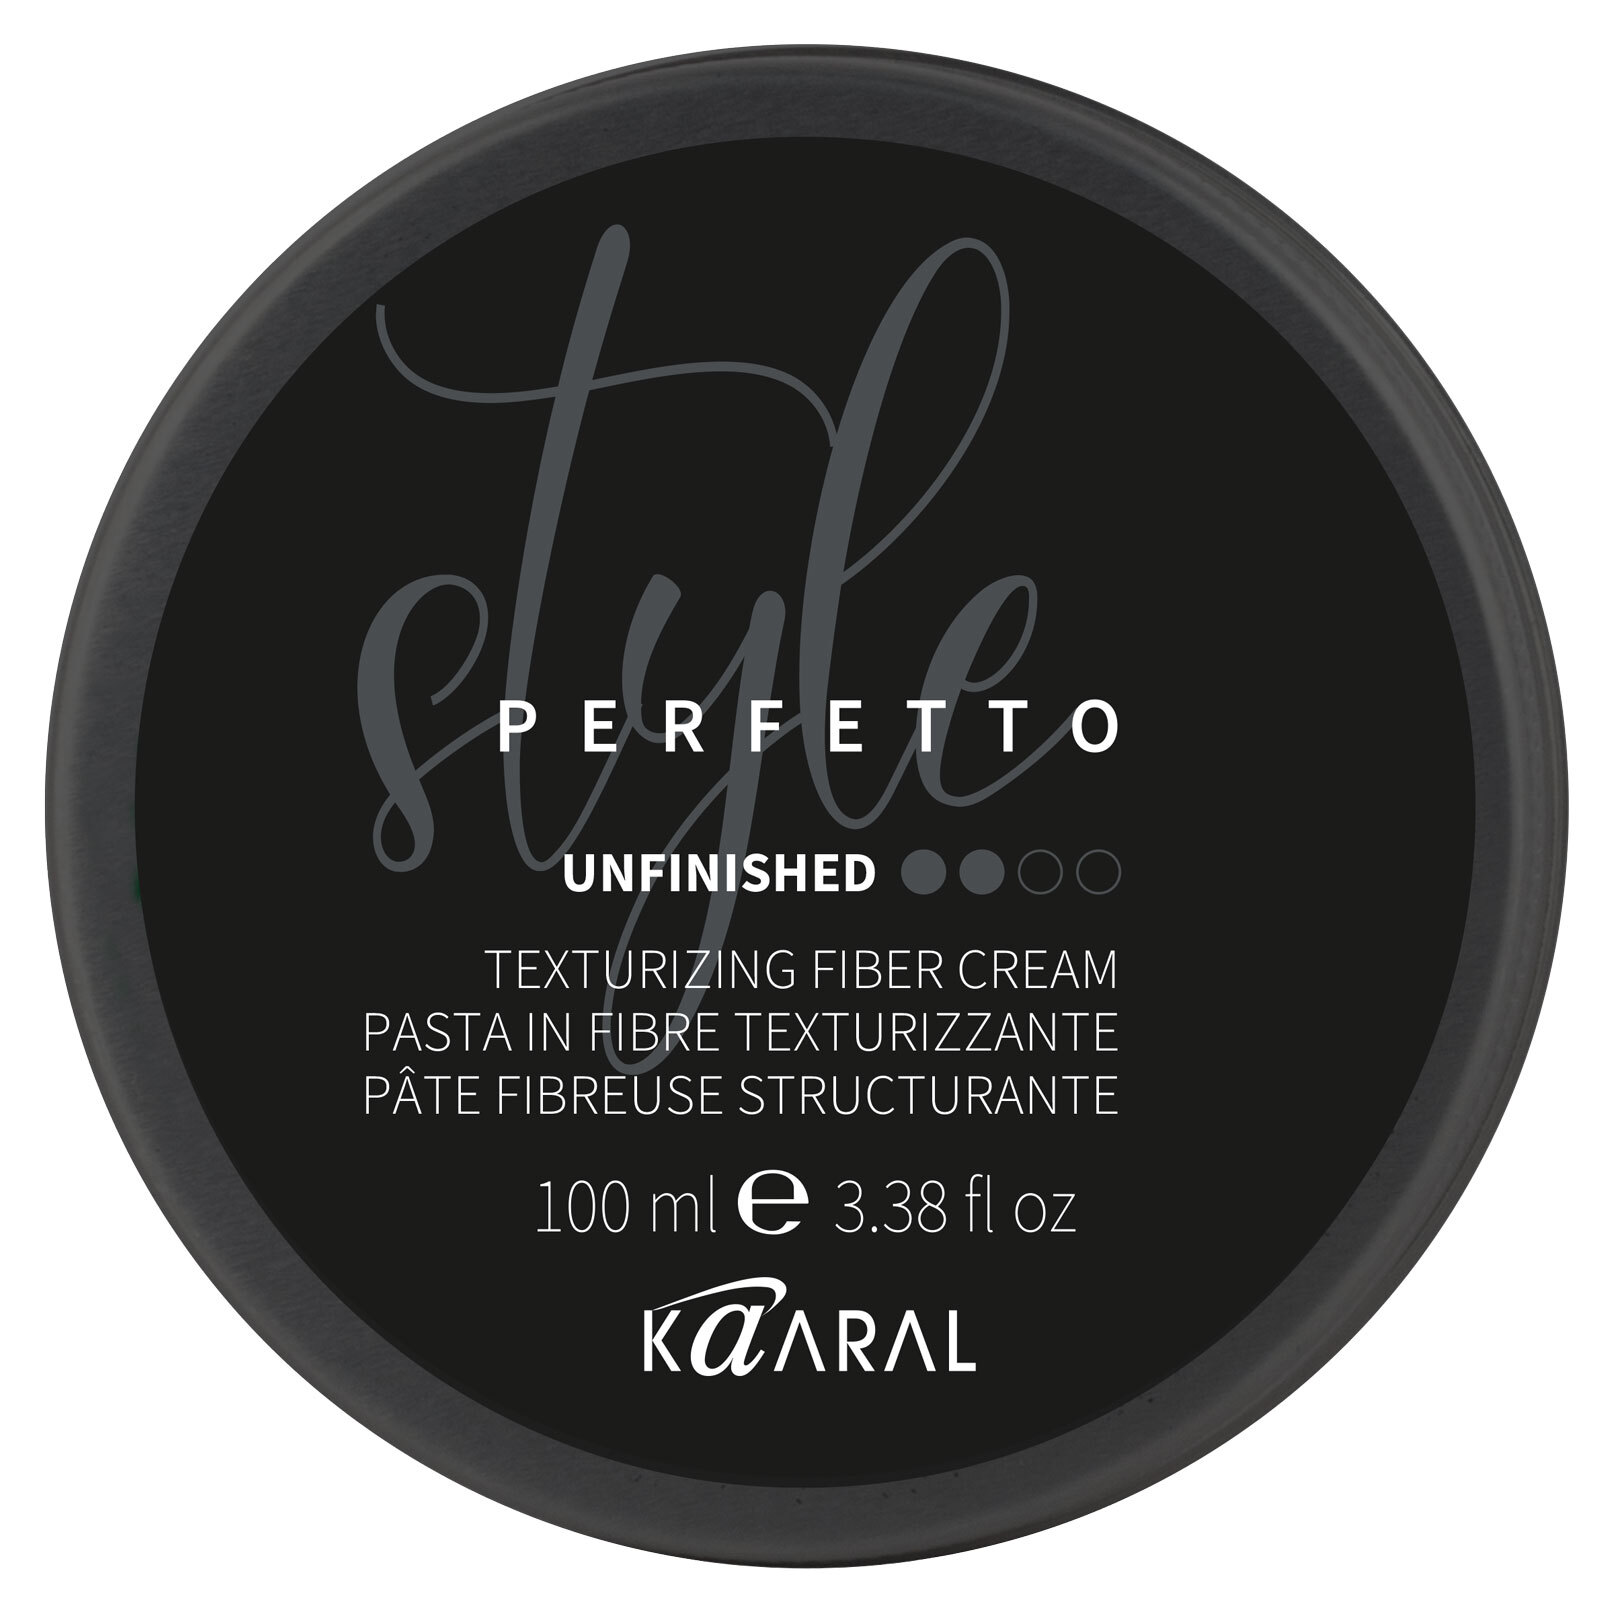 Kaaral Style Perfetto: Unfinished 2.7oz